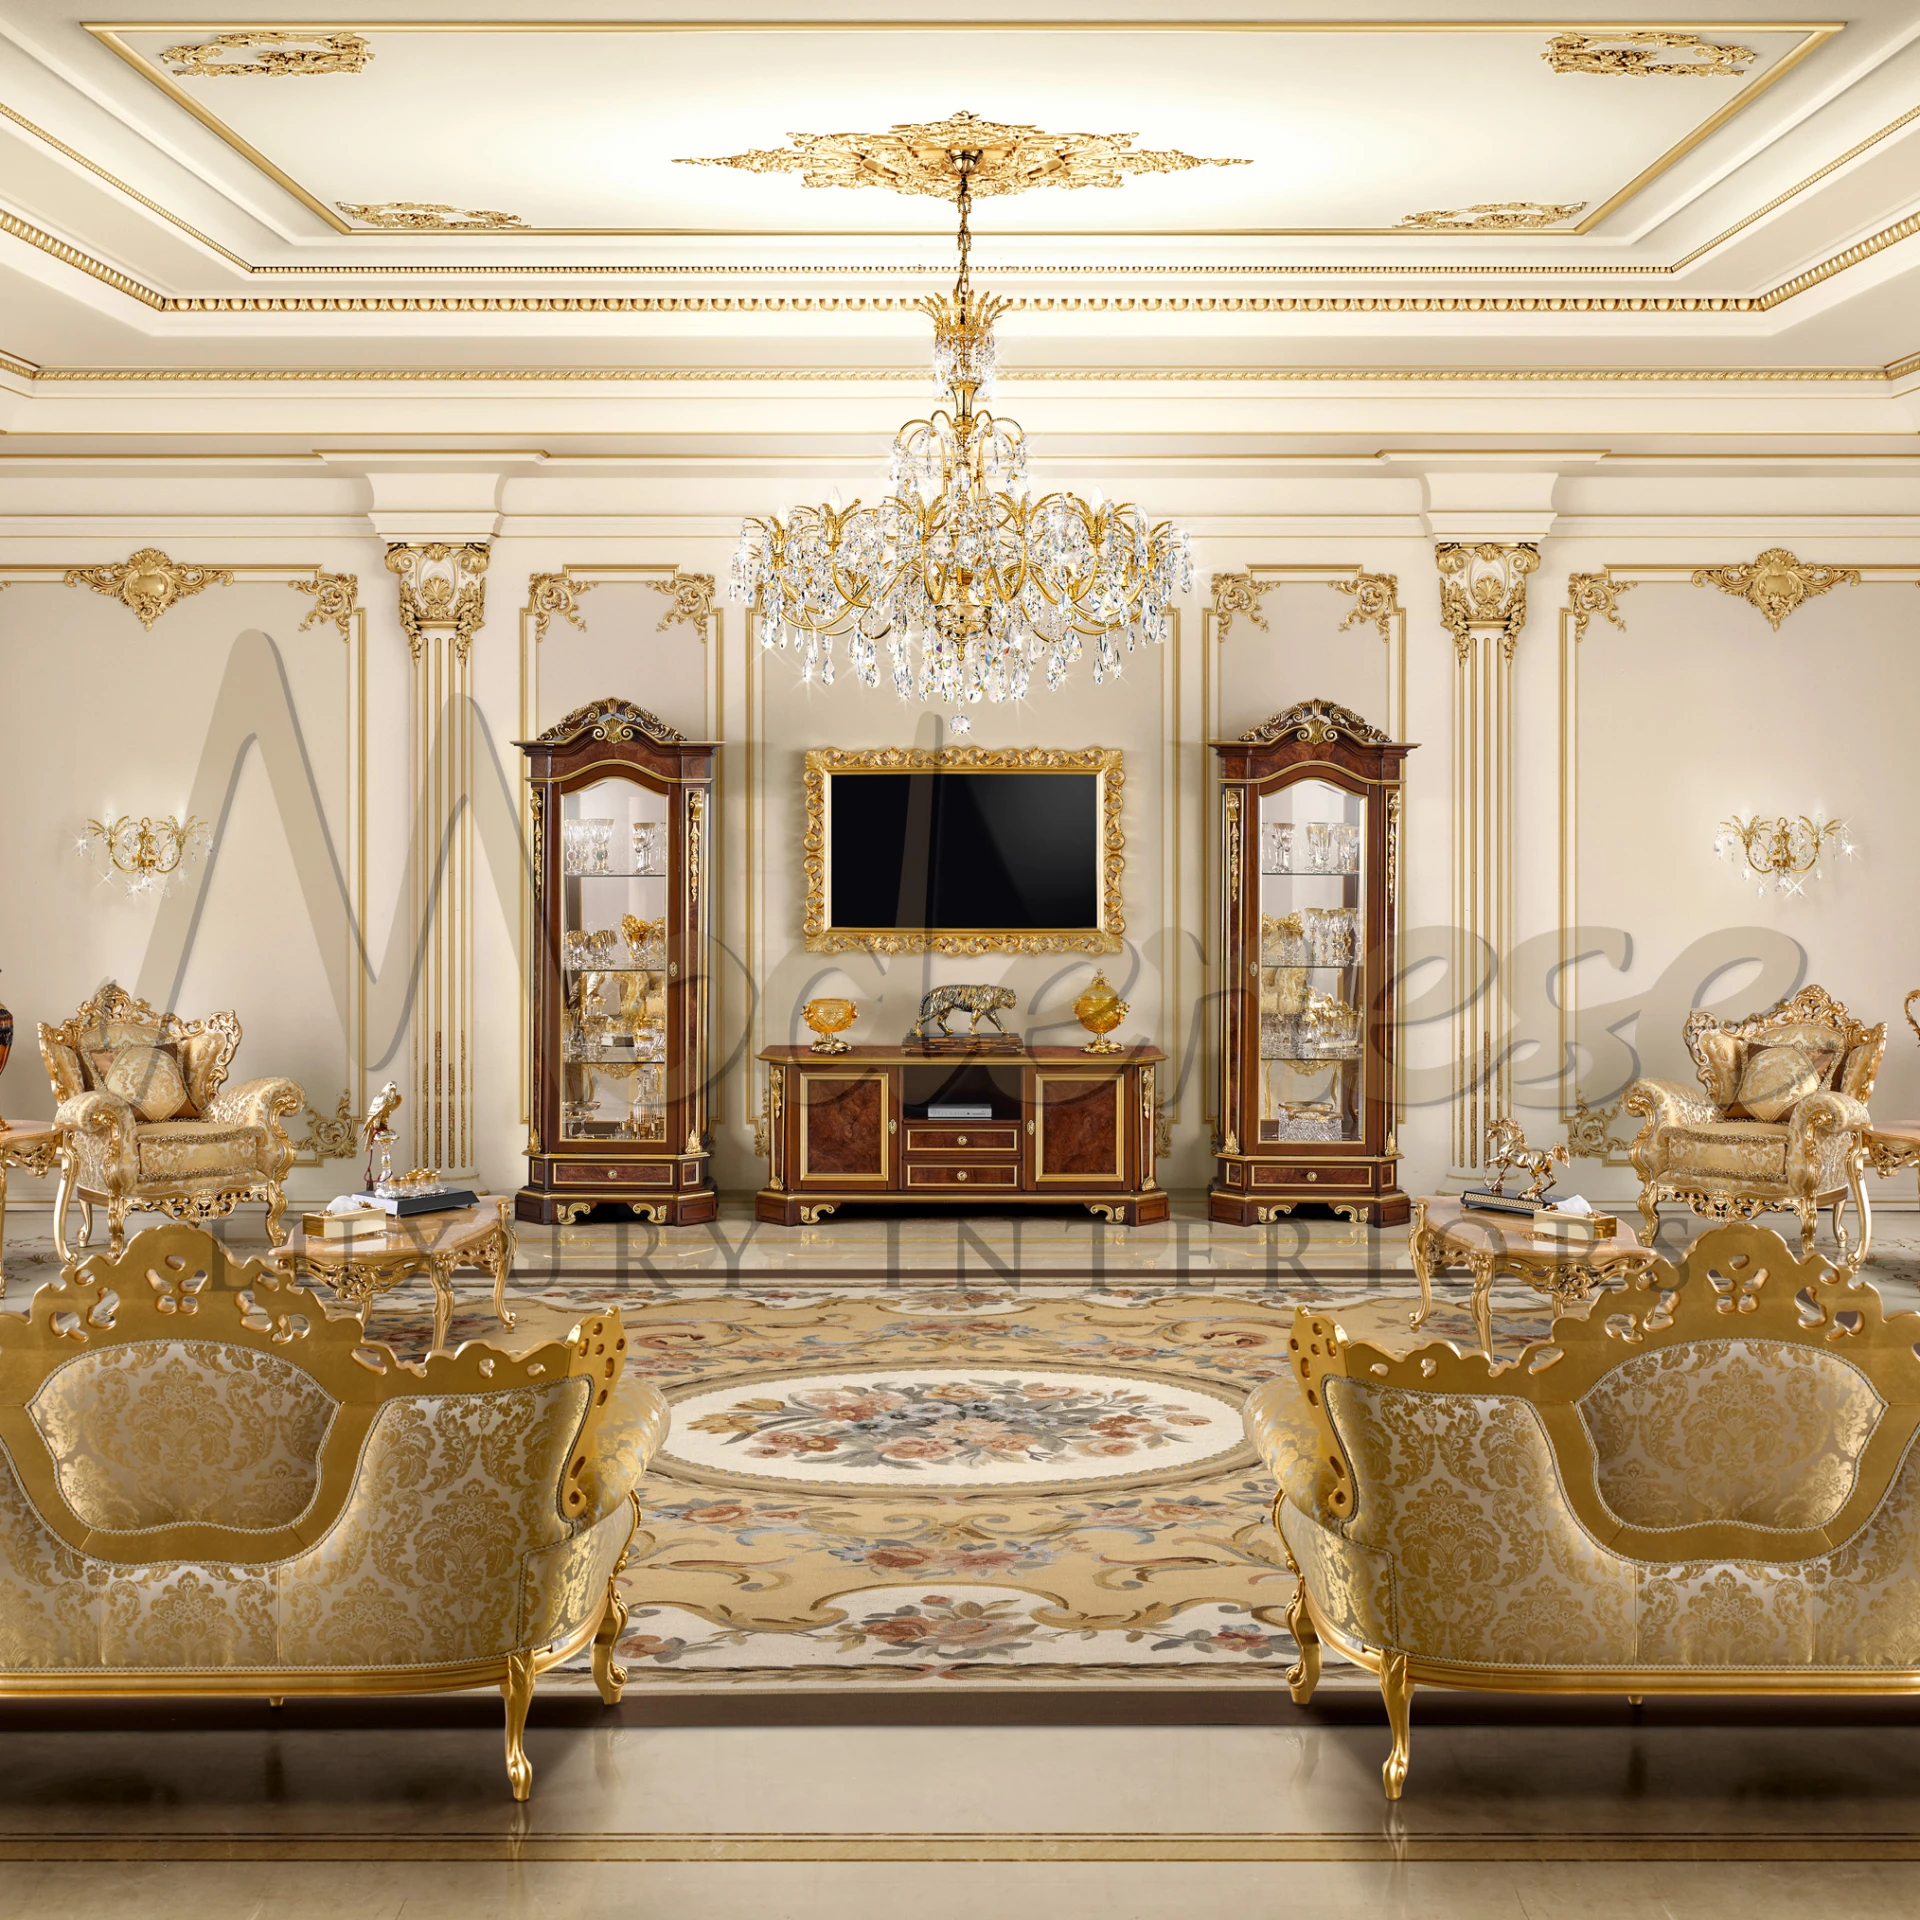 Classic Room with old-style designs and golden patterns everywhere